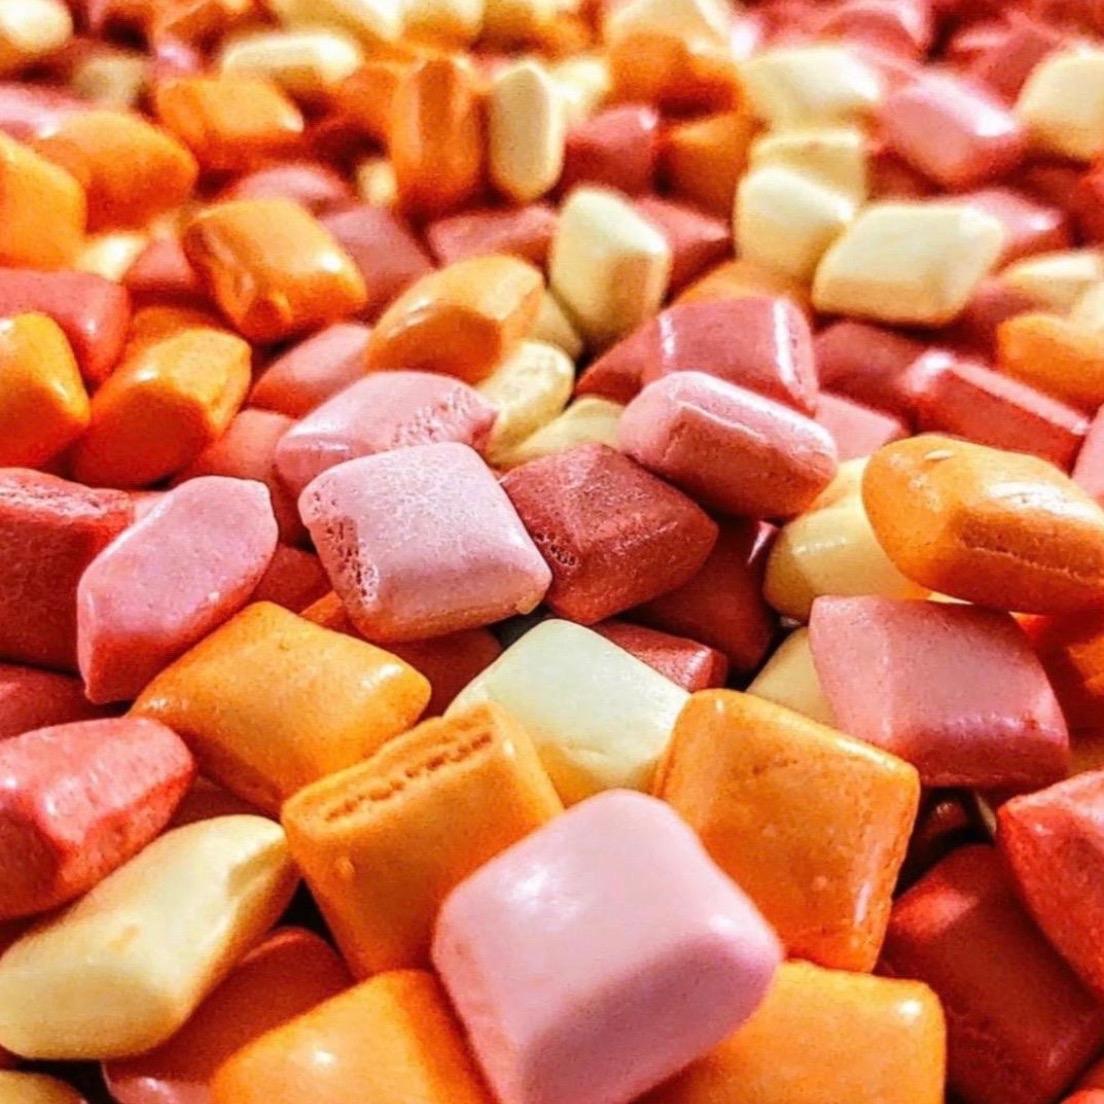 Starburst freeze dried candy bag.